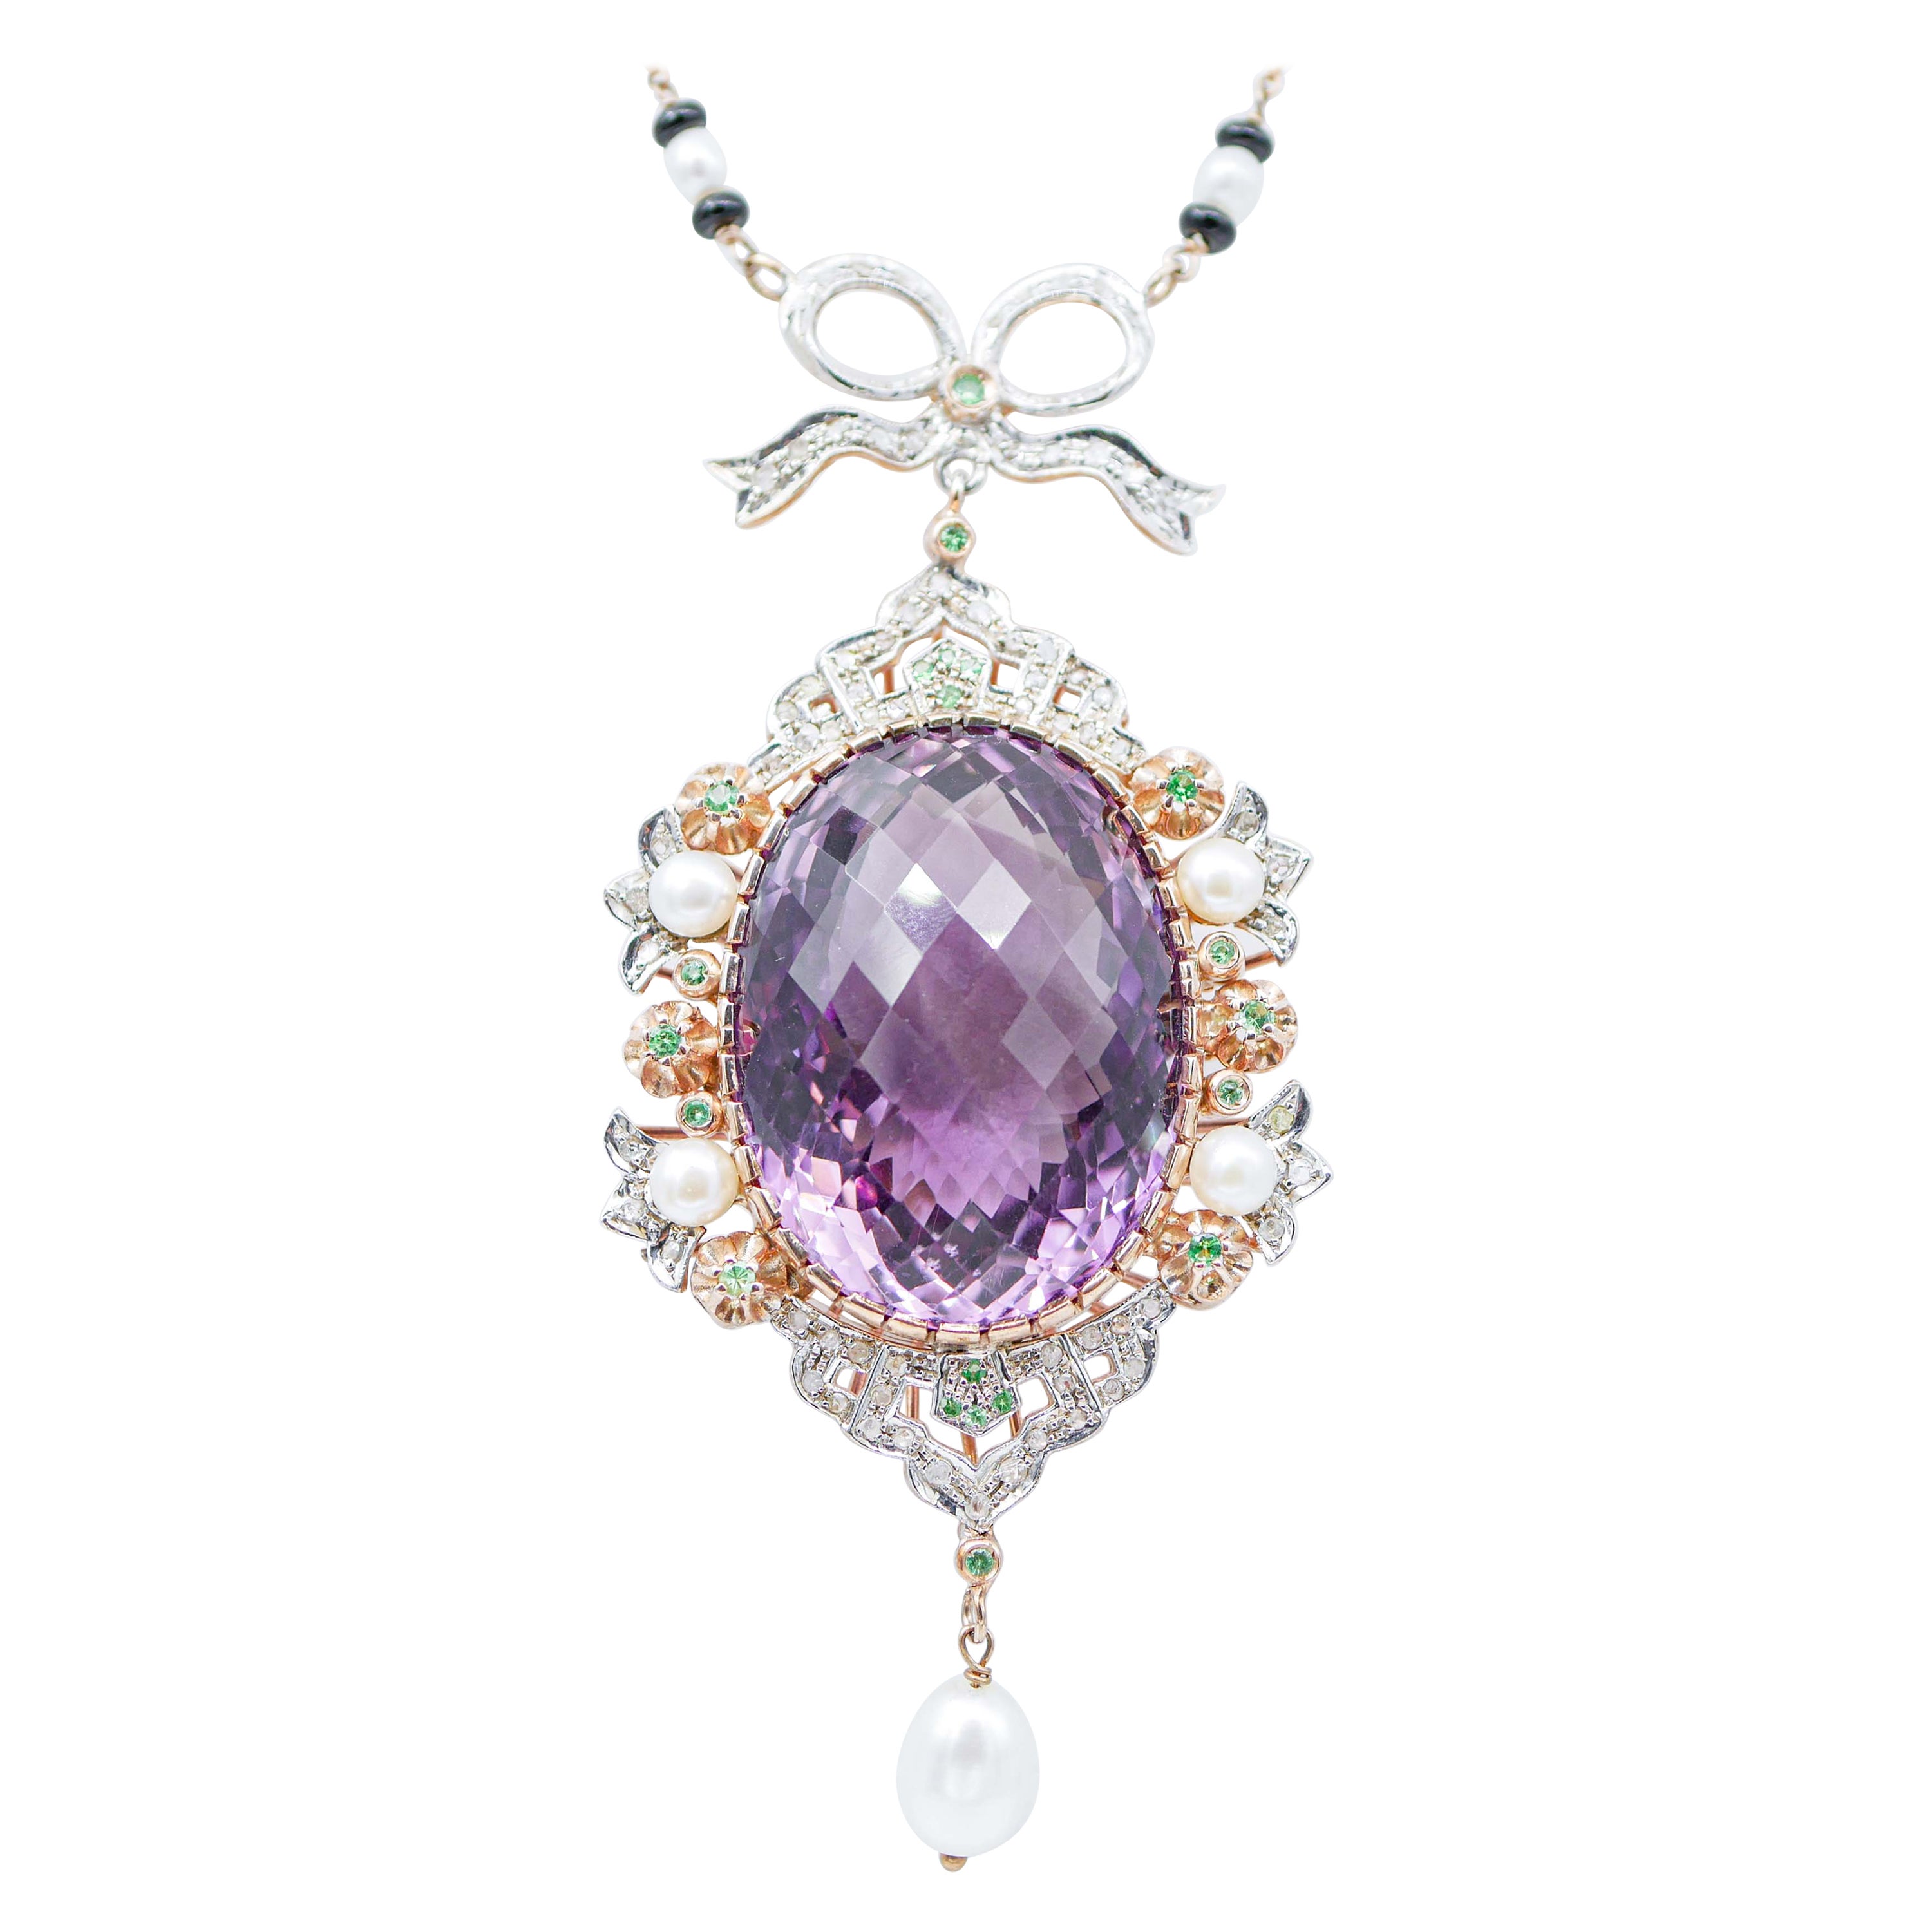 Amethyst, Tsavorite, Diamonds, Onyx, Pearls,  Gold and Silver Pendant Necklace For Sale